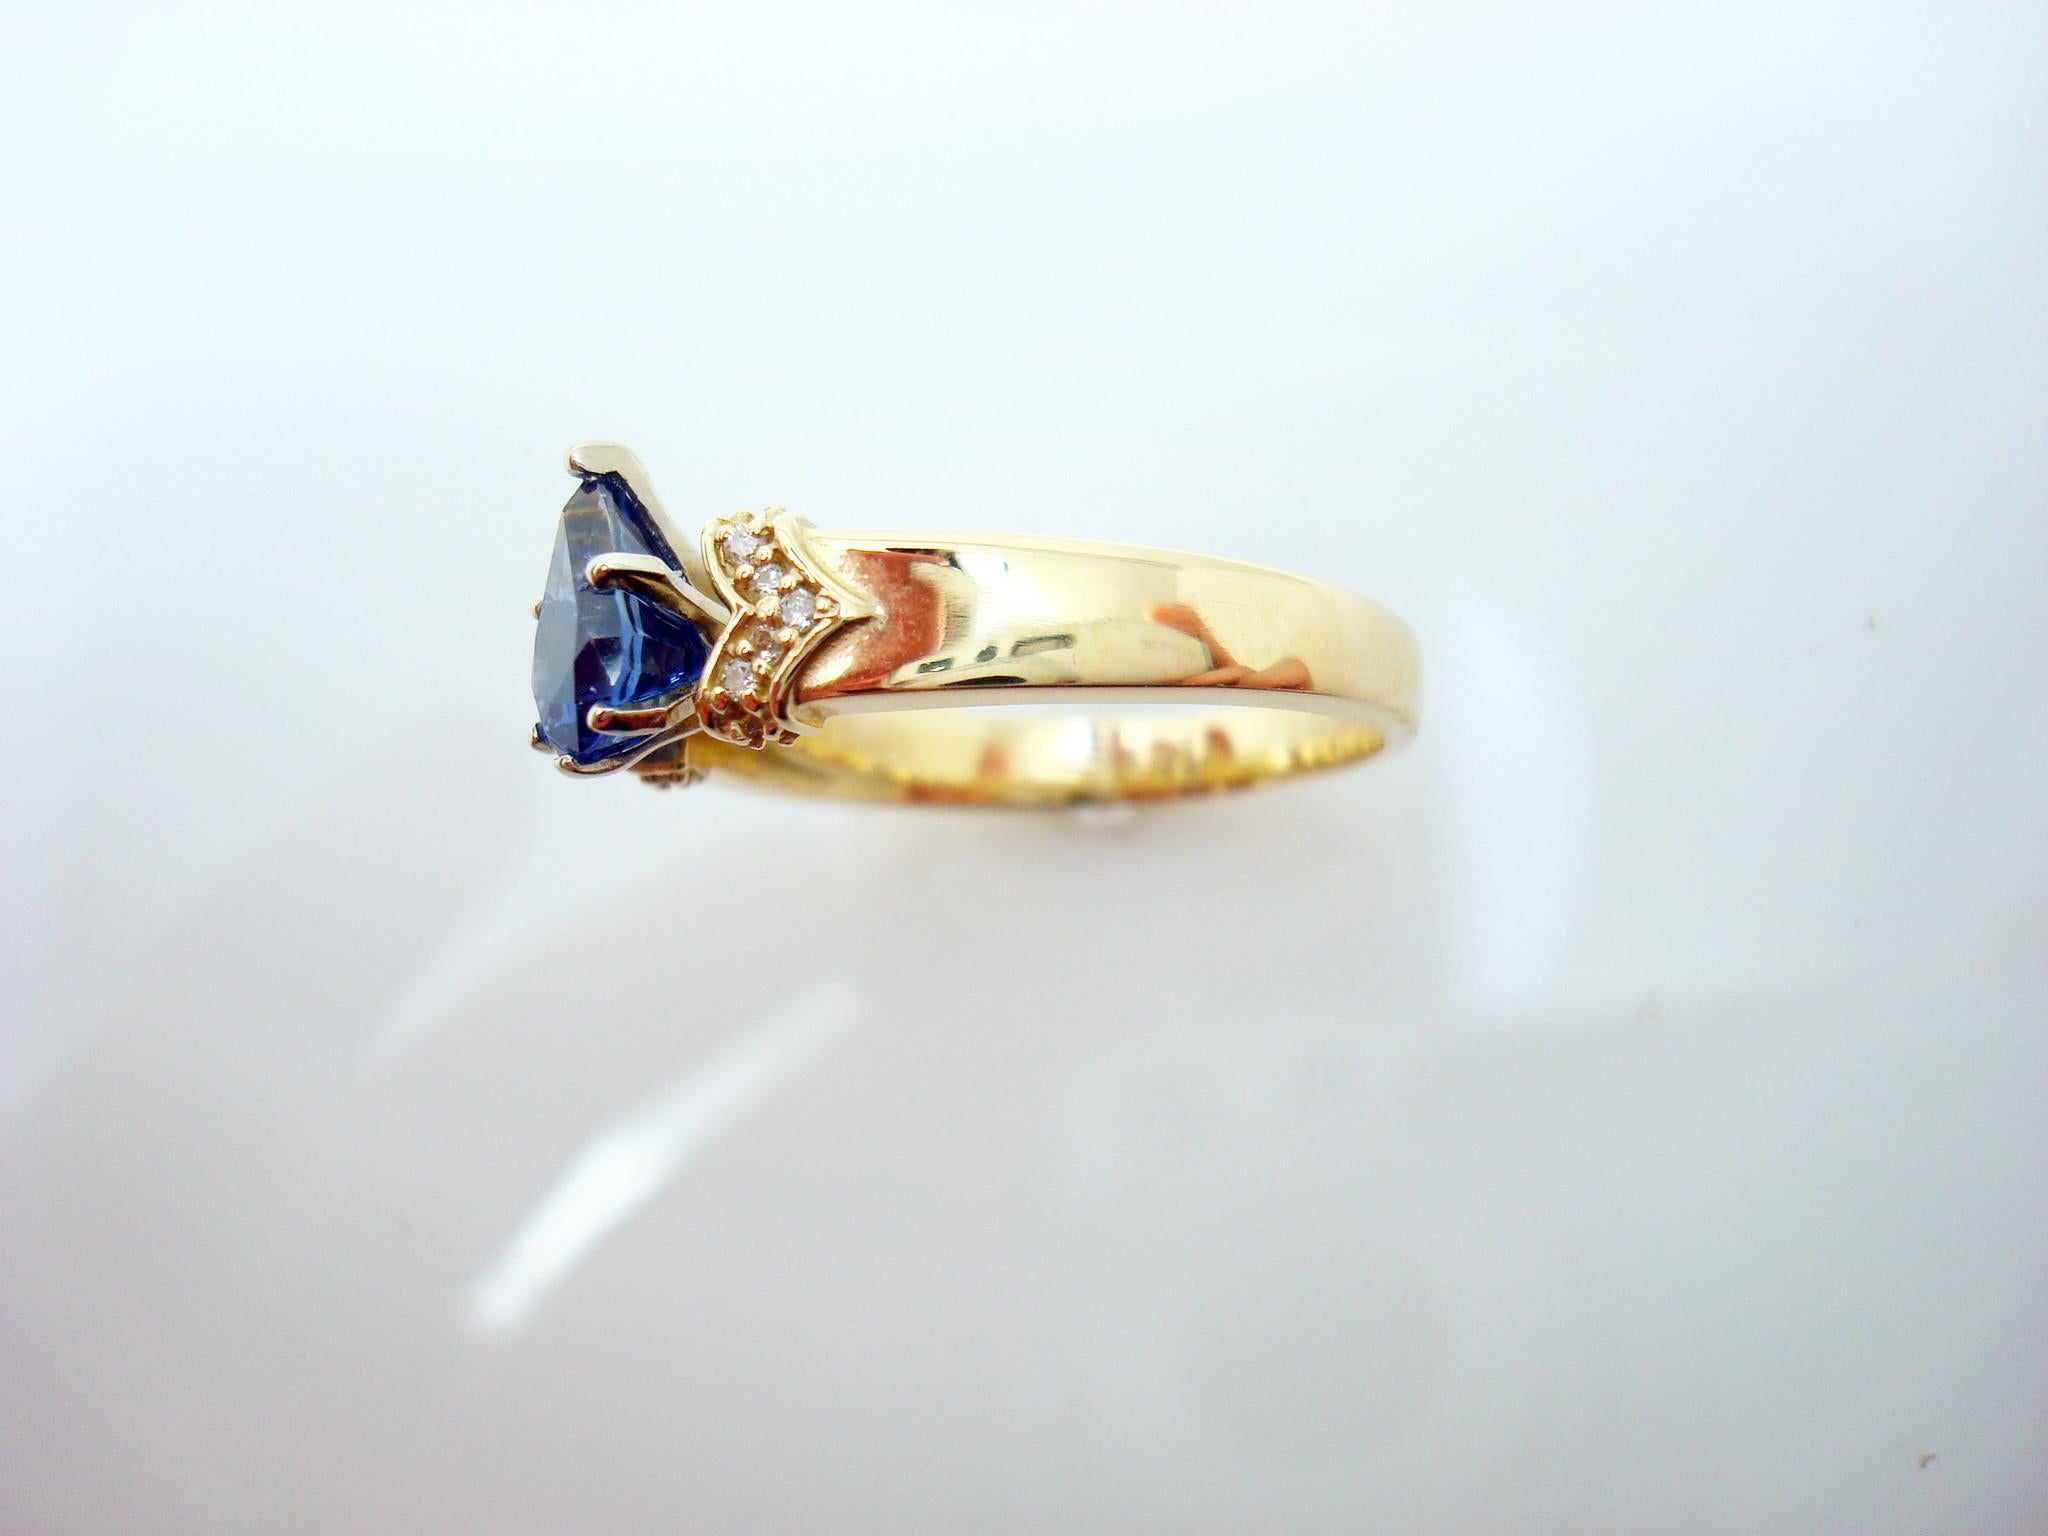 14K yellow gold sapphire & diamond ring featuring a royal blue pear shape sapphire weighing 1.28 carats. The sapphire is accented by a wide band set with with small round diamond accents.  The Sapphire measures 8mm x 5.5mm and the Diamonds are 1mm. 